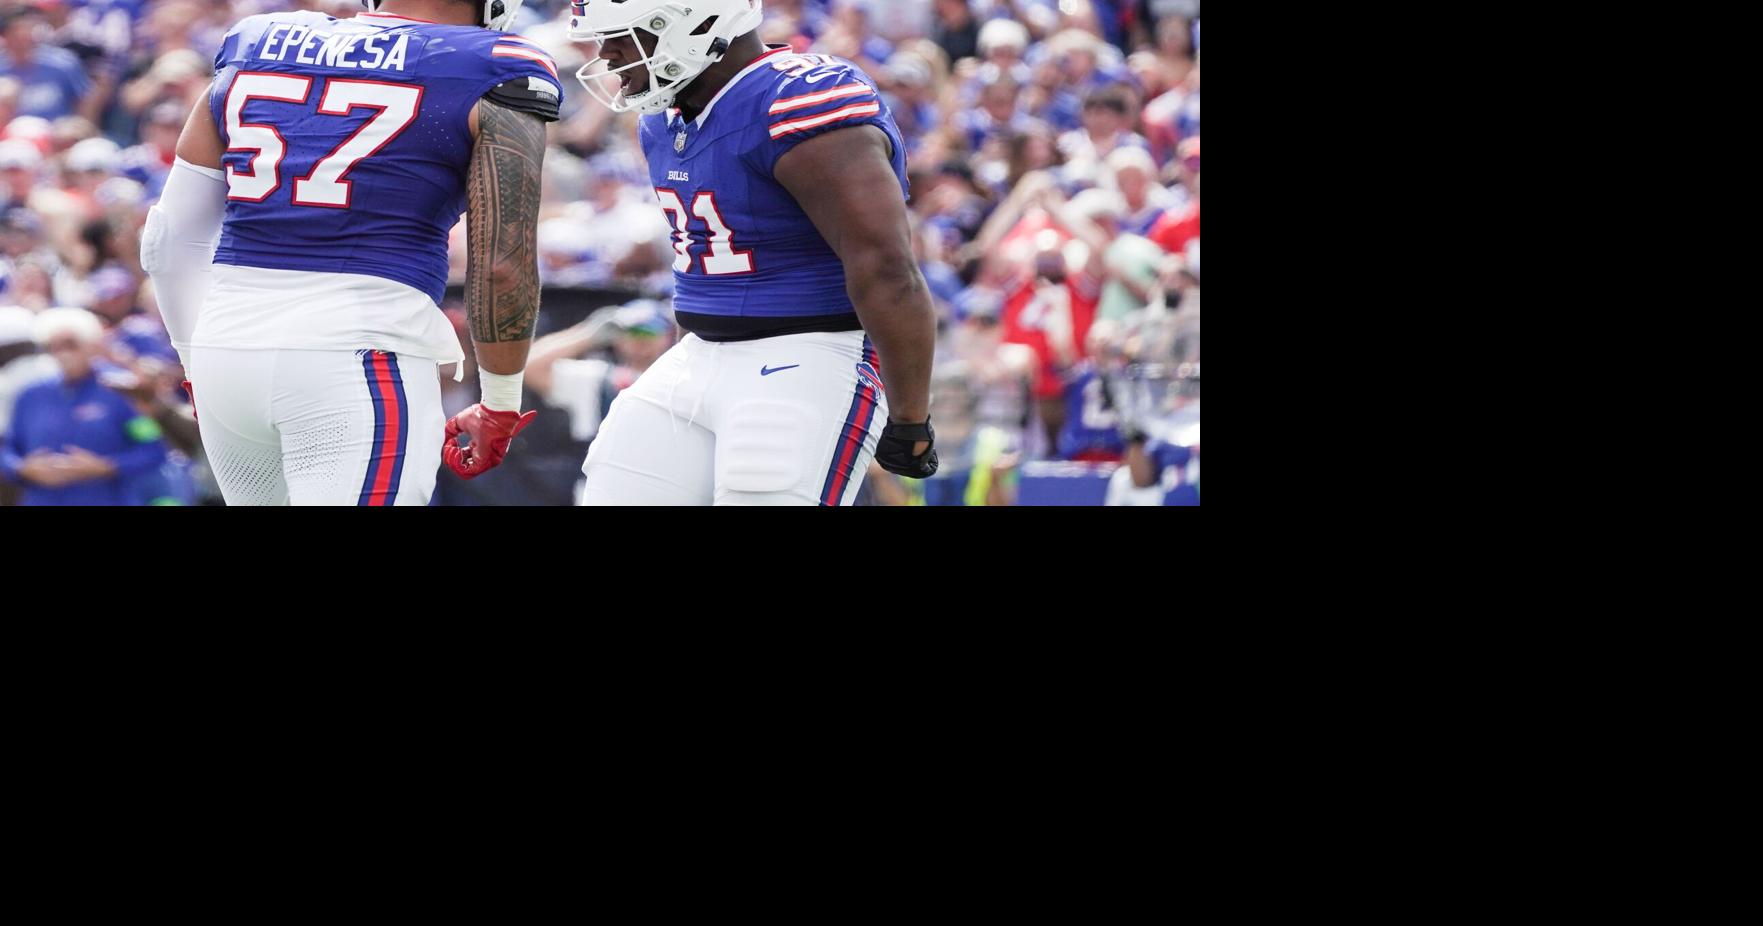 Allen and the Bills are back on track and want to keep rolling at the 2-0  Commanders